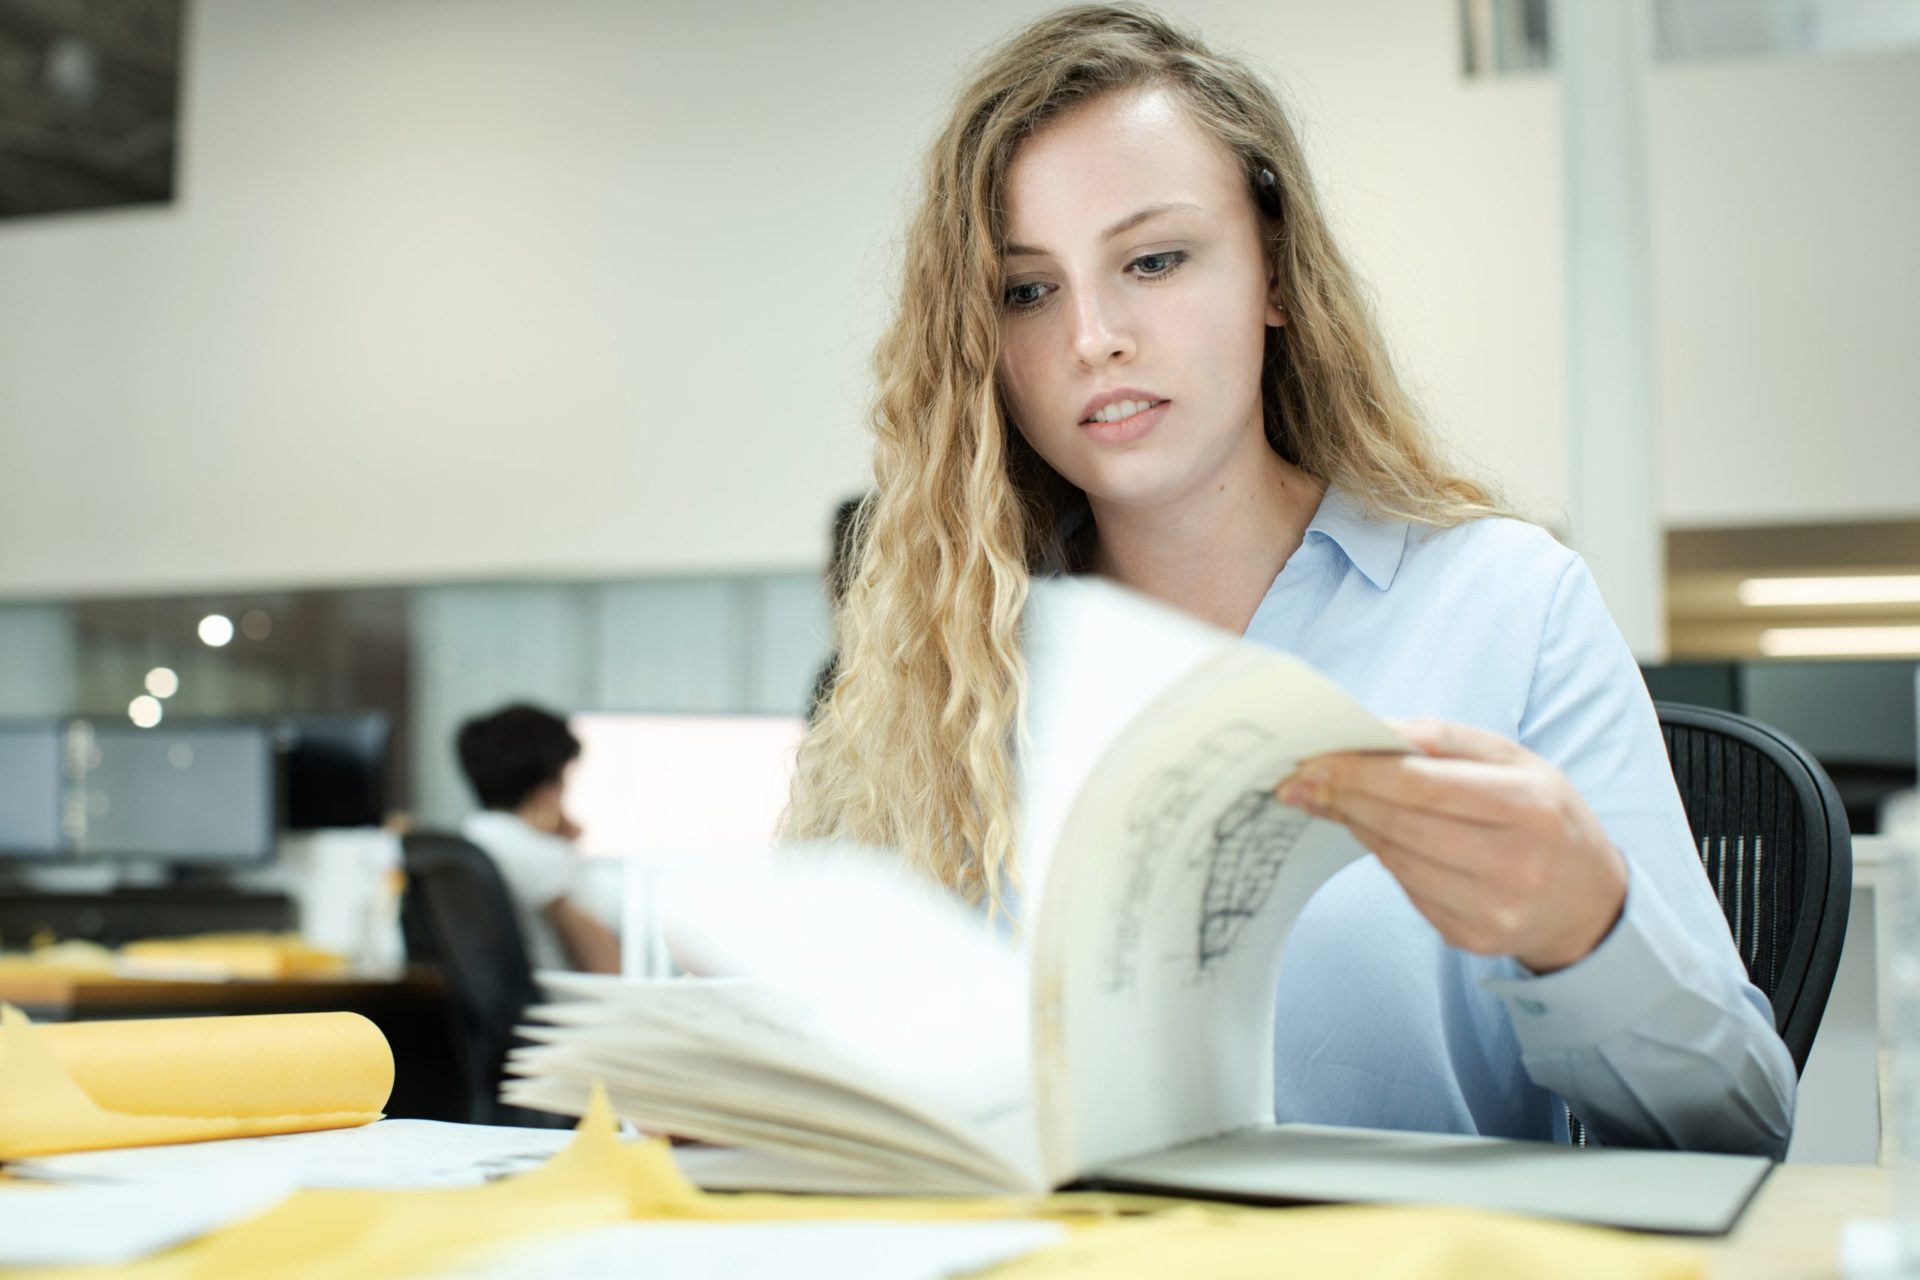 A young female architect with curly blonde hair wearing a bright blue shirt working at her desk flipping through architecture plans in a white office